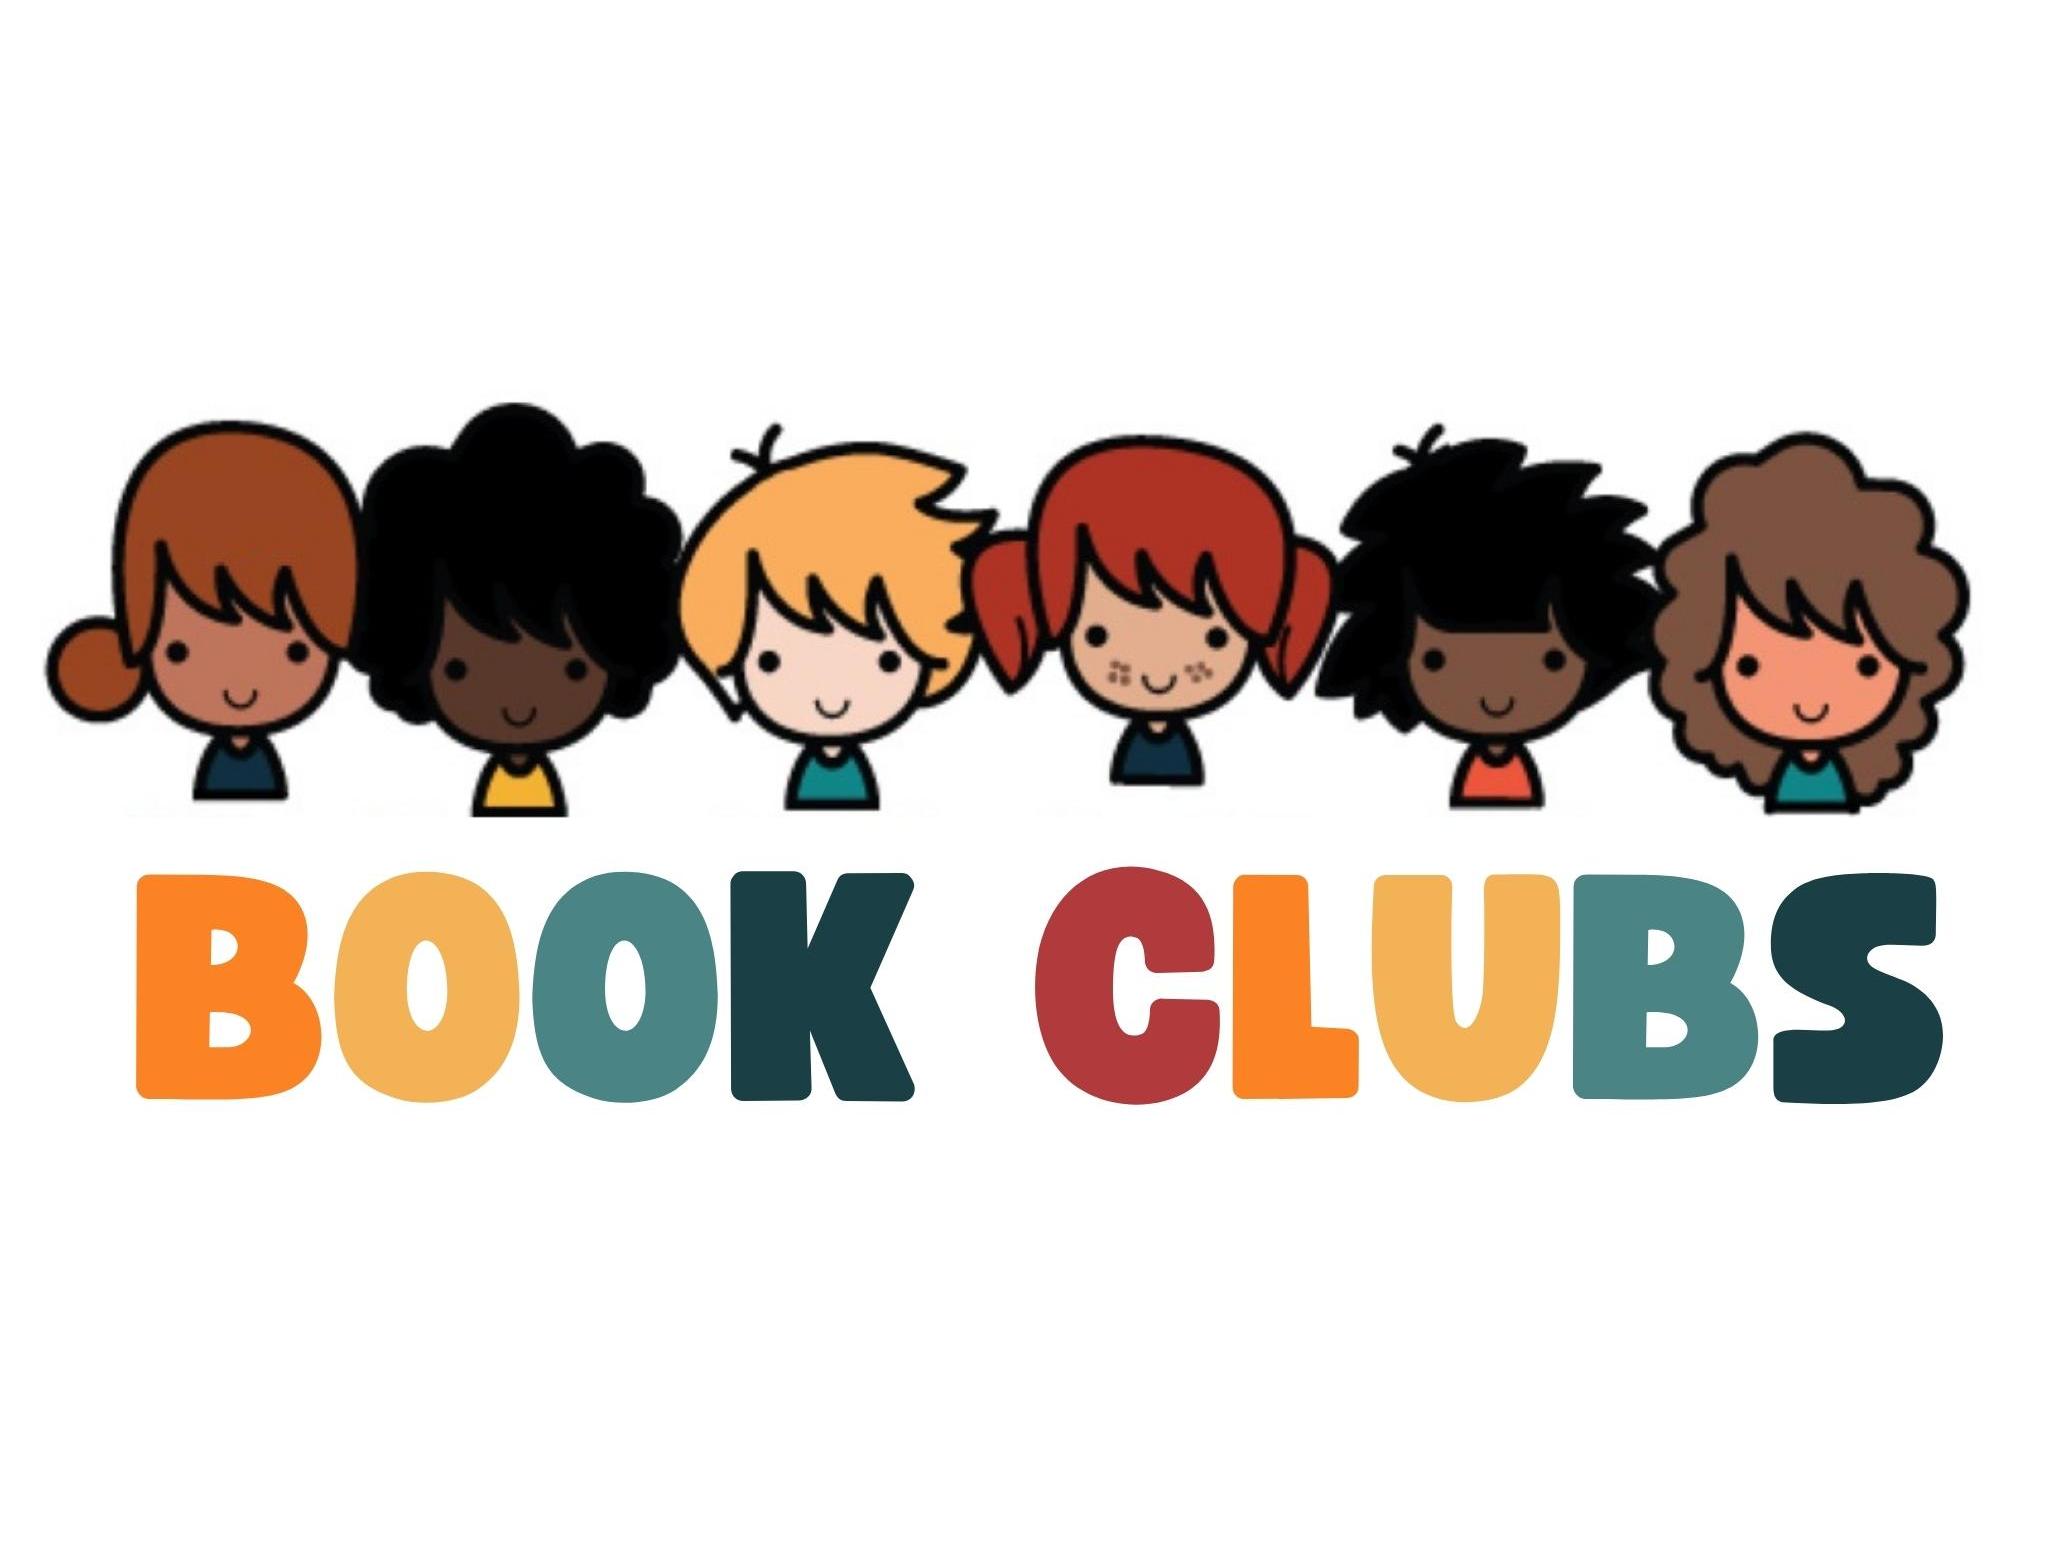 Picture of kids with the caption "BOOK CLUBS".